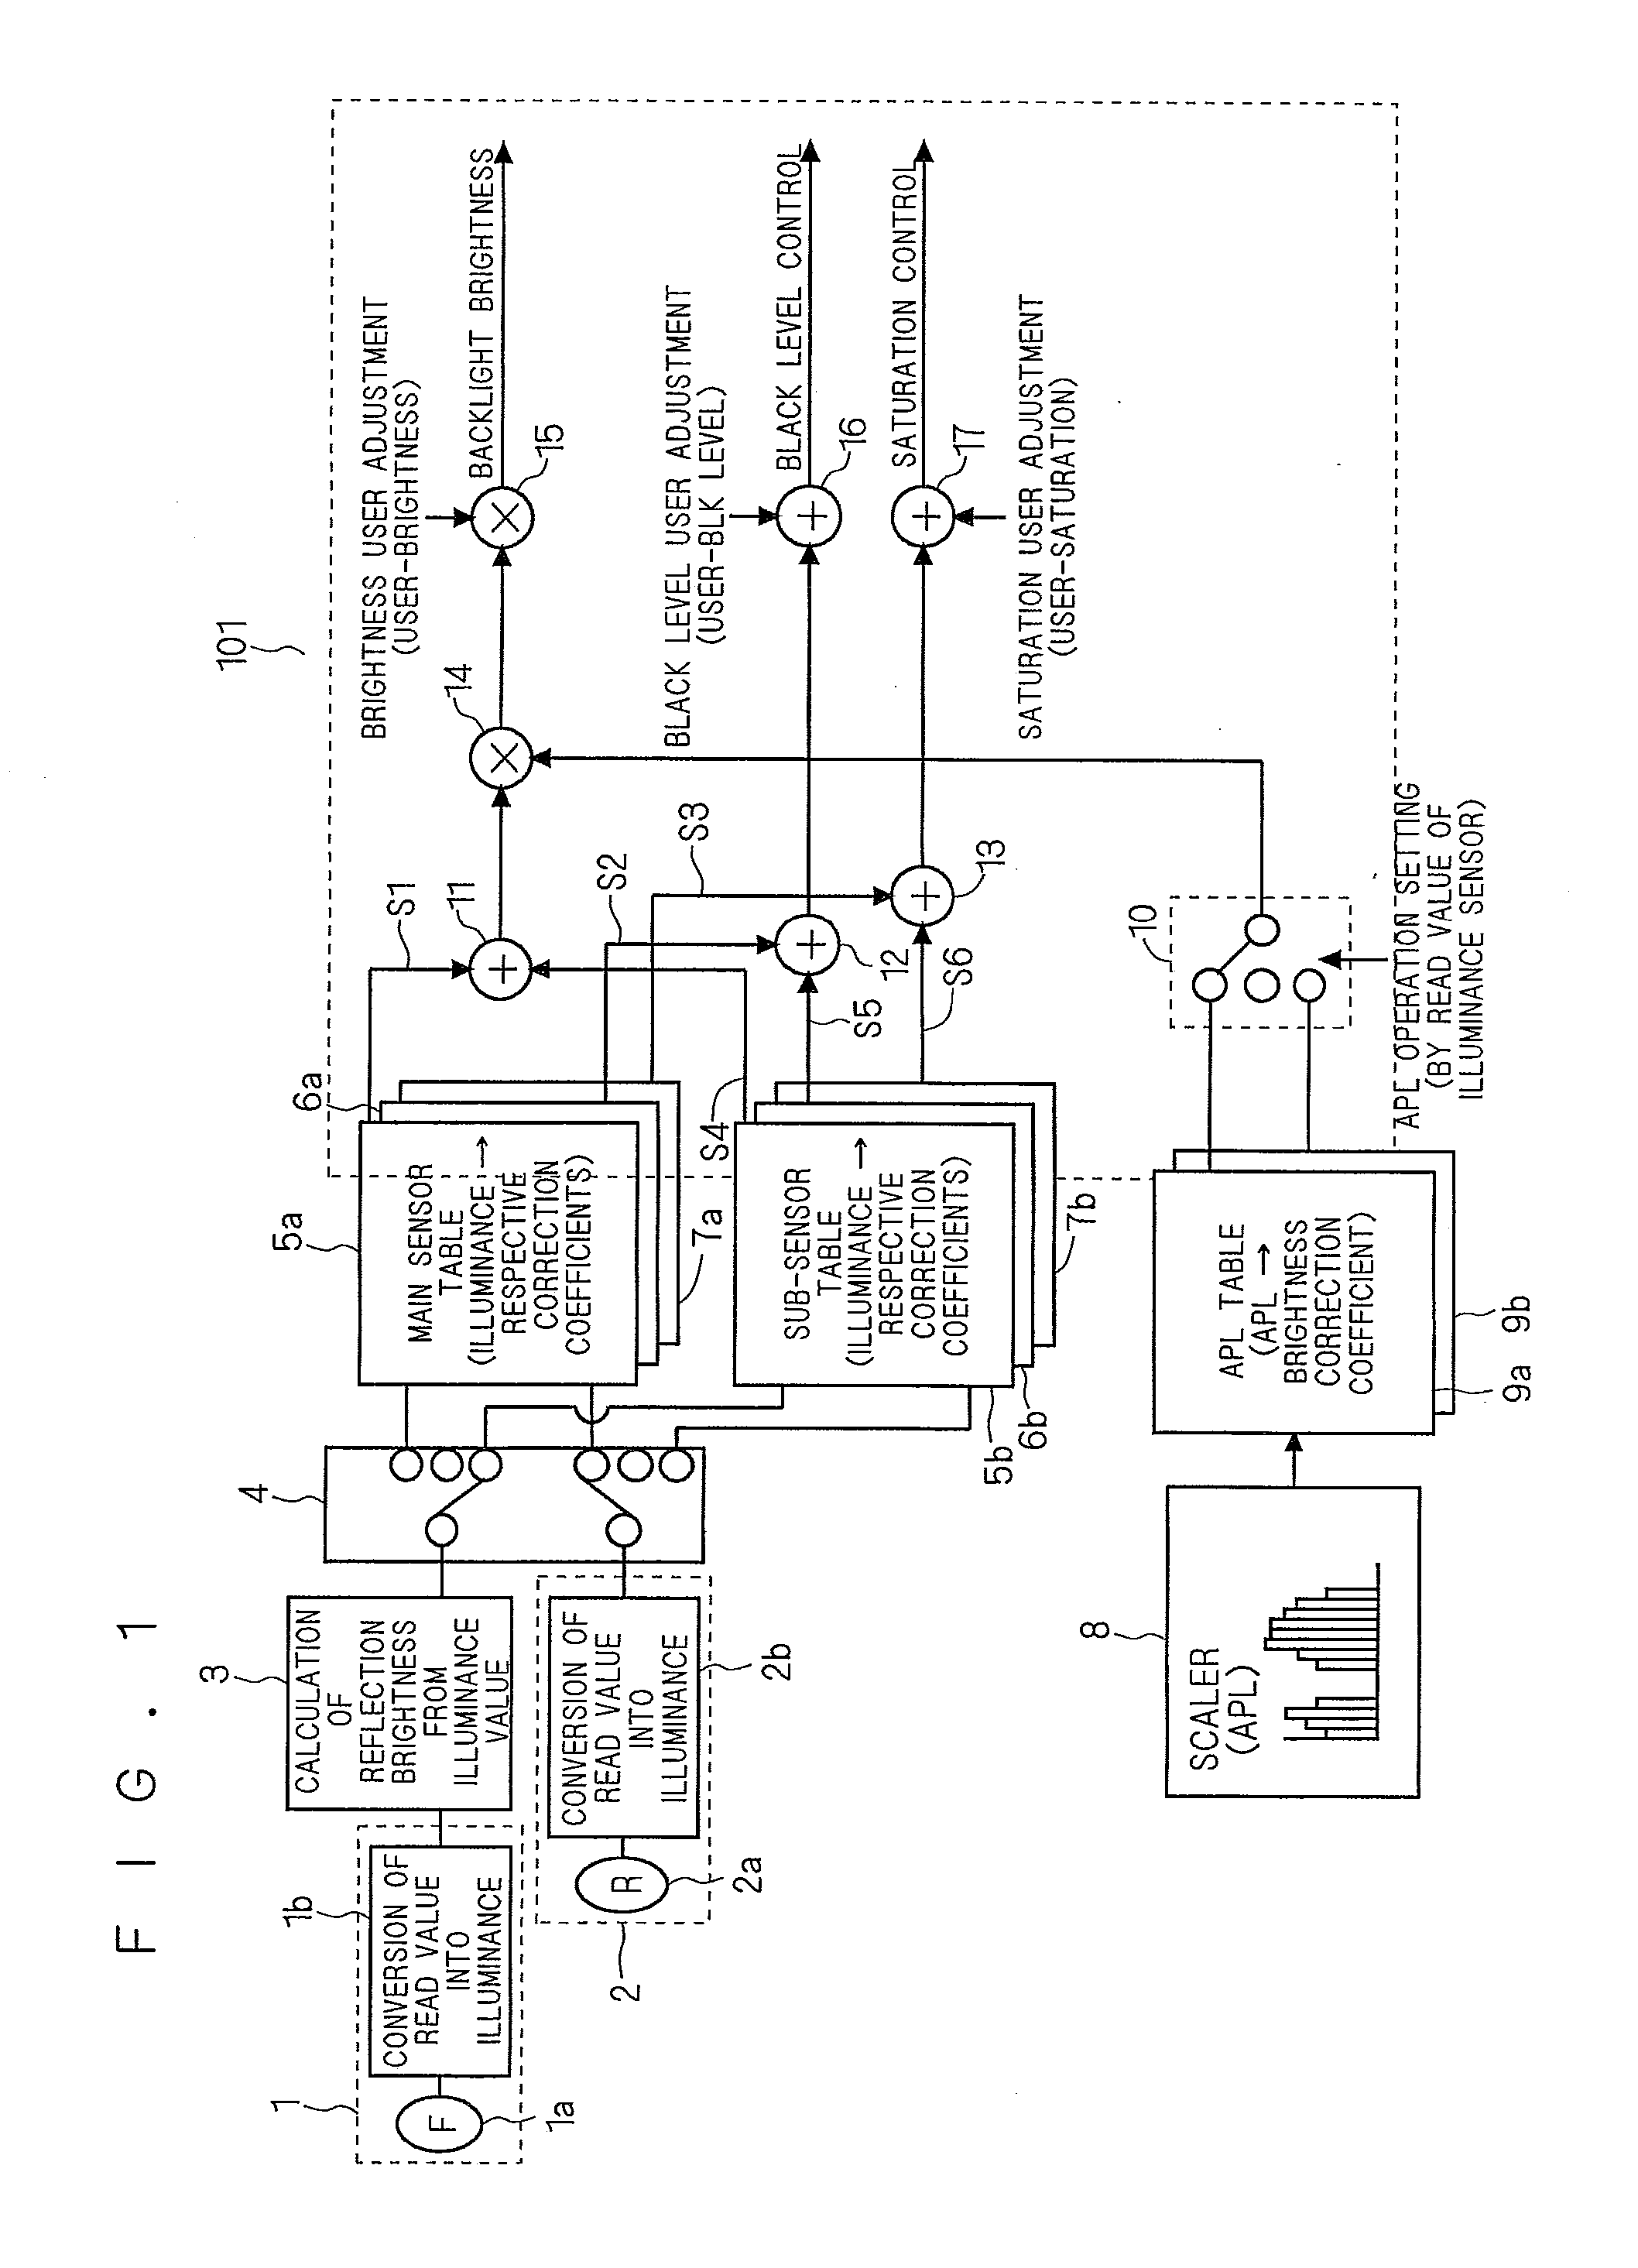 Display device and display system